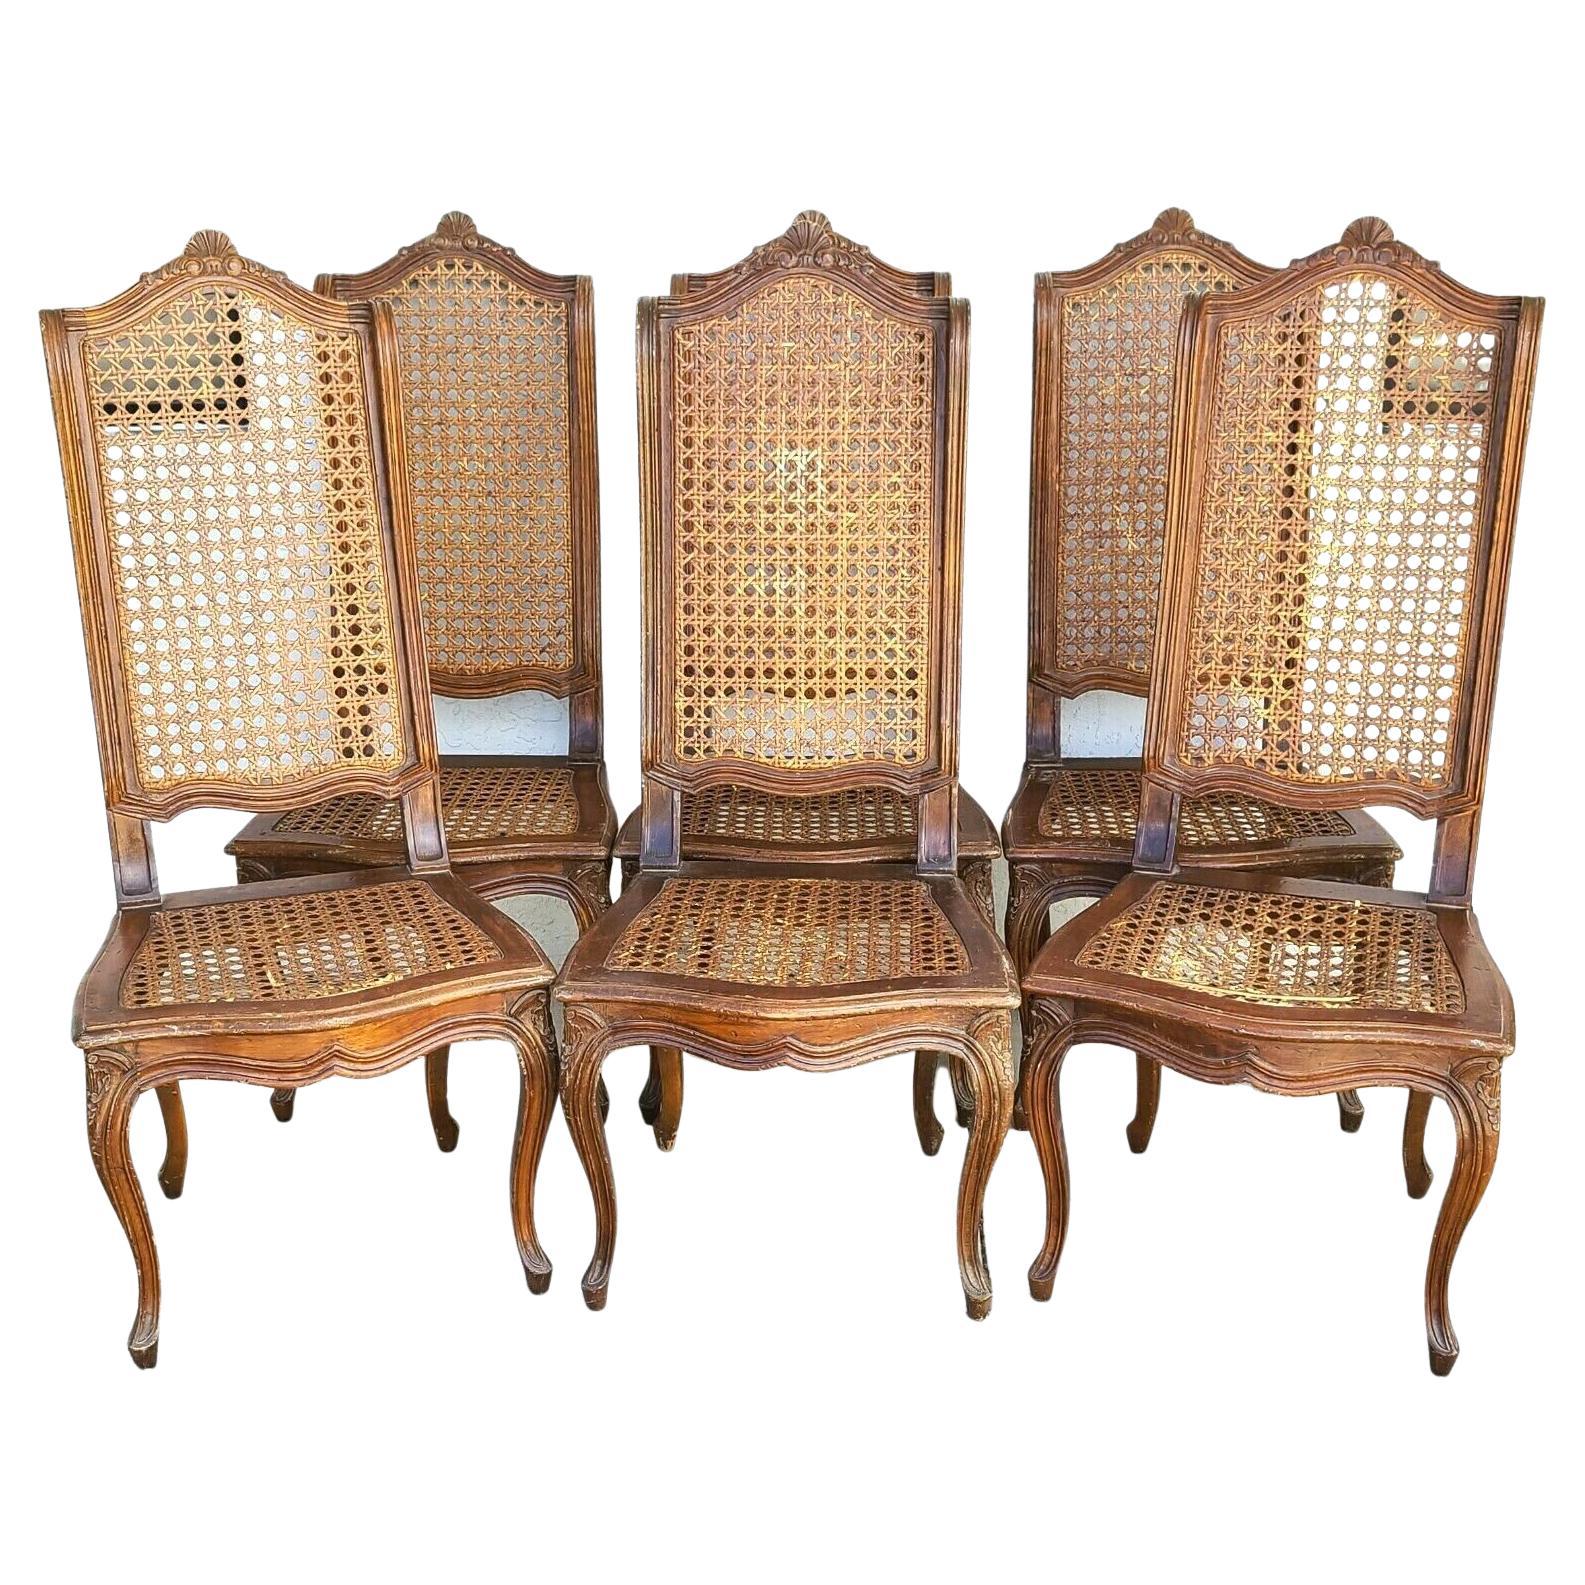 '6' Mid Century French Wingback Cane Dining Chairs by Mariano Garcia of Spain For Sale